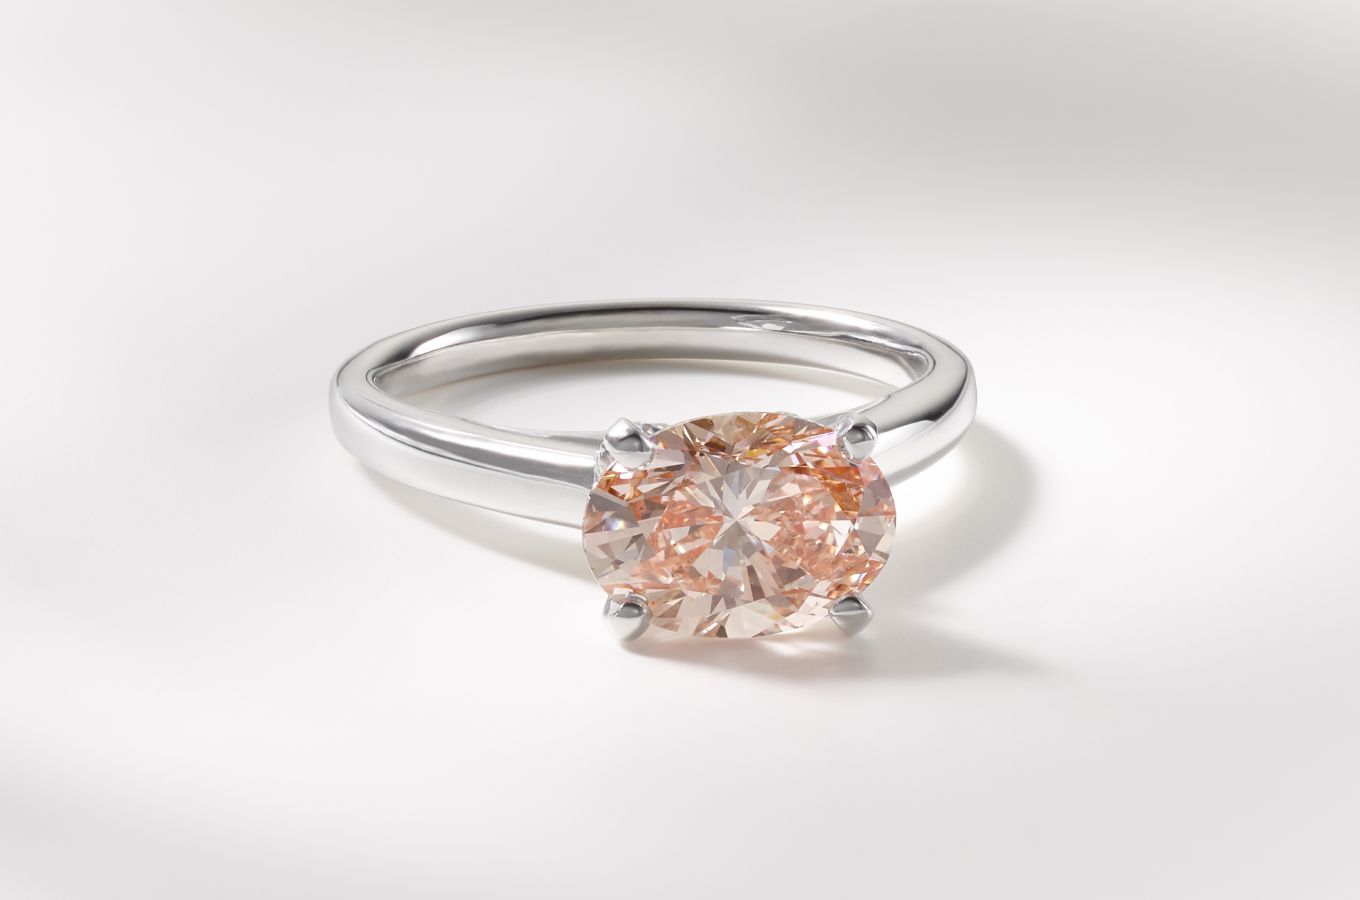 An oval shape fancy pink lab-grown diamond set in a white gold ring